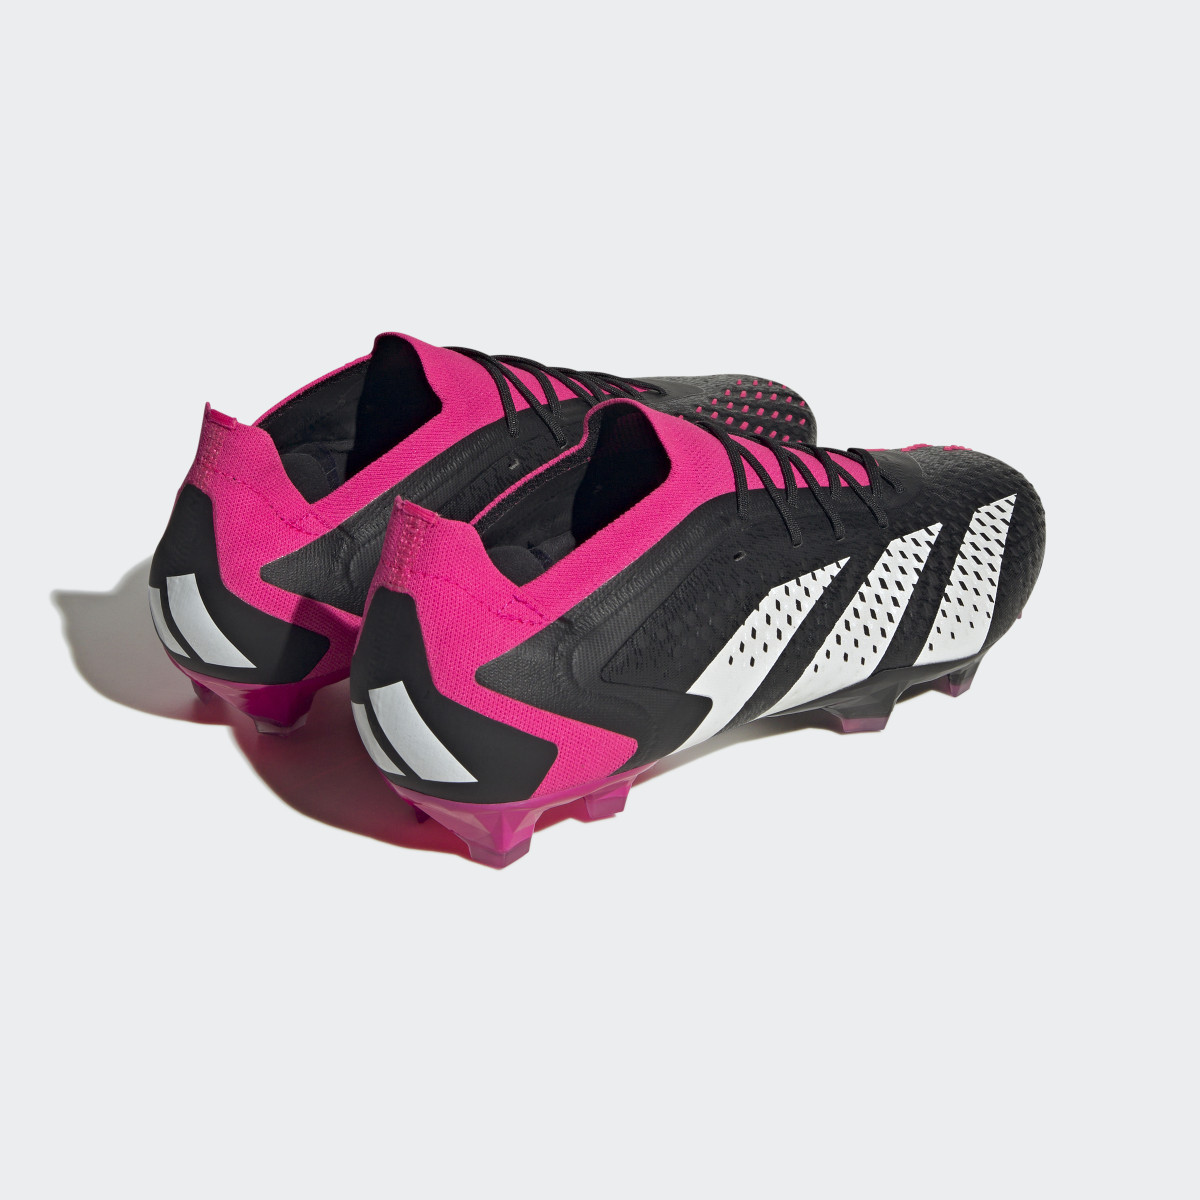 Adidas Predator Accuracy.1 Low Firm Ground Boots. 10